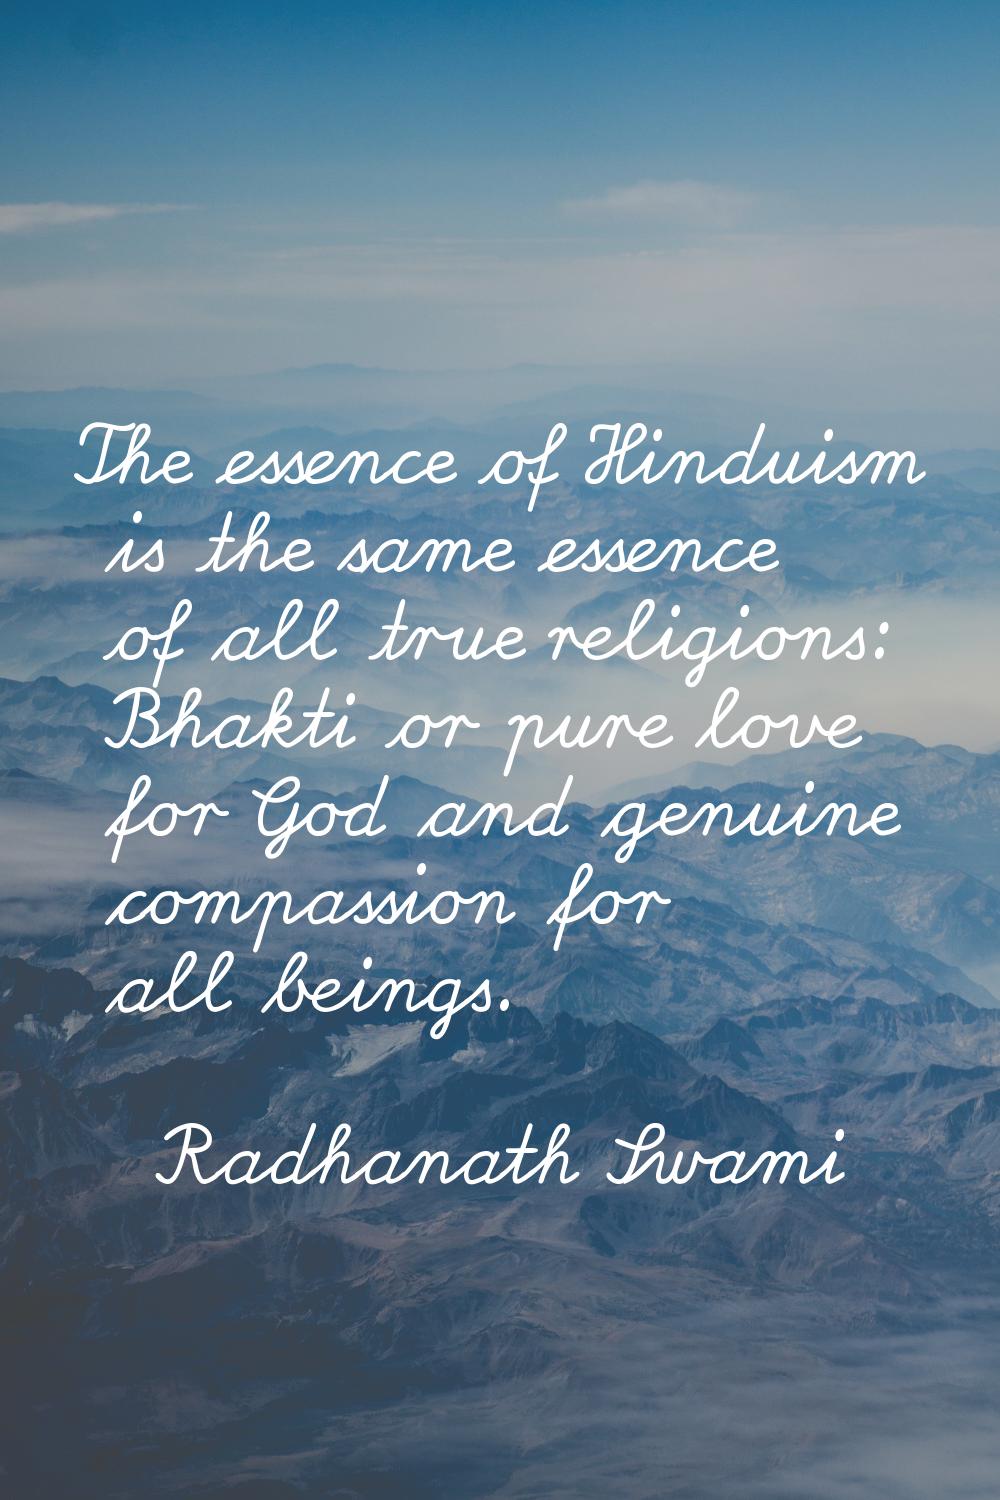 The essence of Hinduism is the same essence of all true religions: Bhakti or pure love for God and 